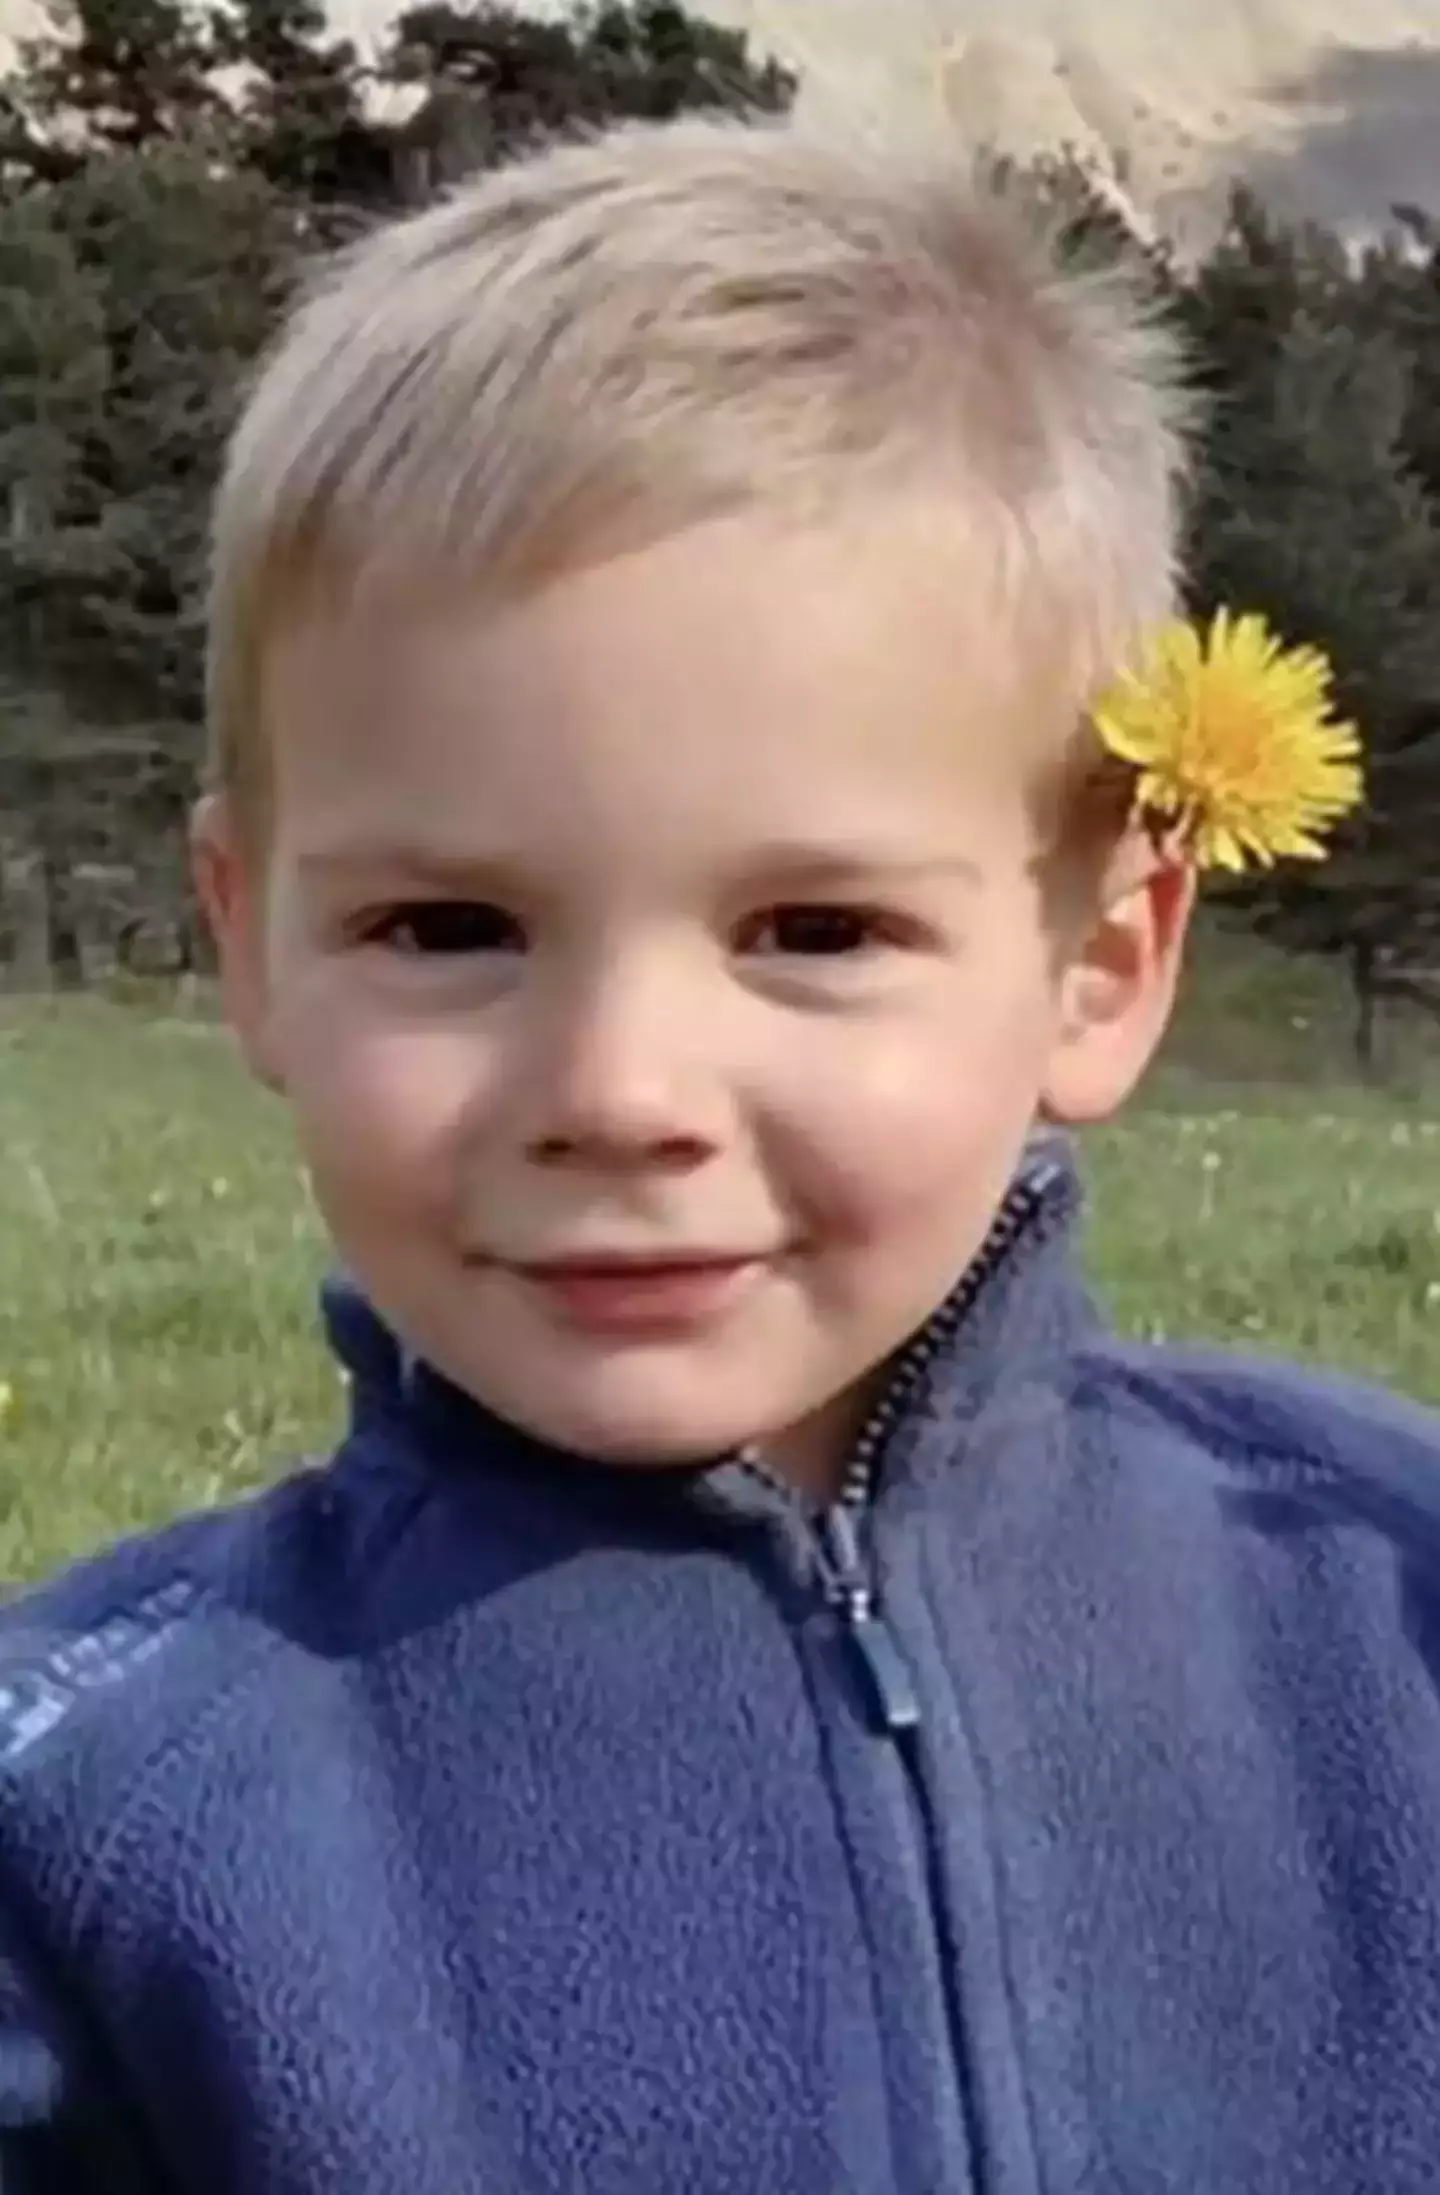 The remains of the toddler were found by a hiker on 30 March (Police Handout)